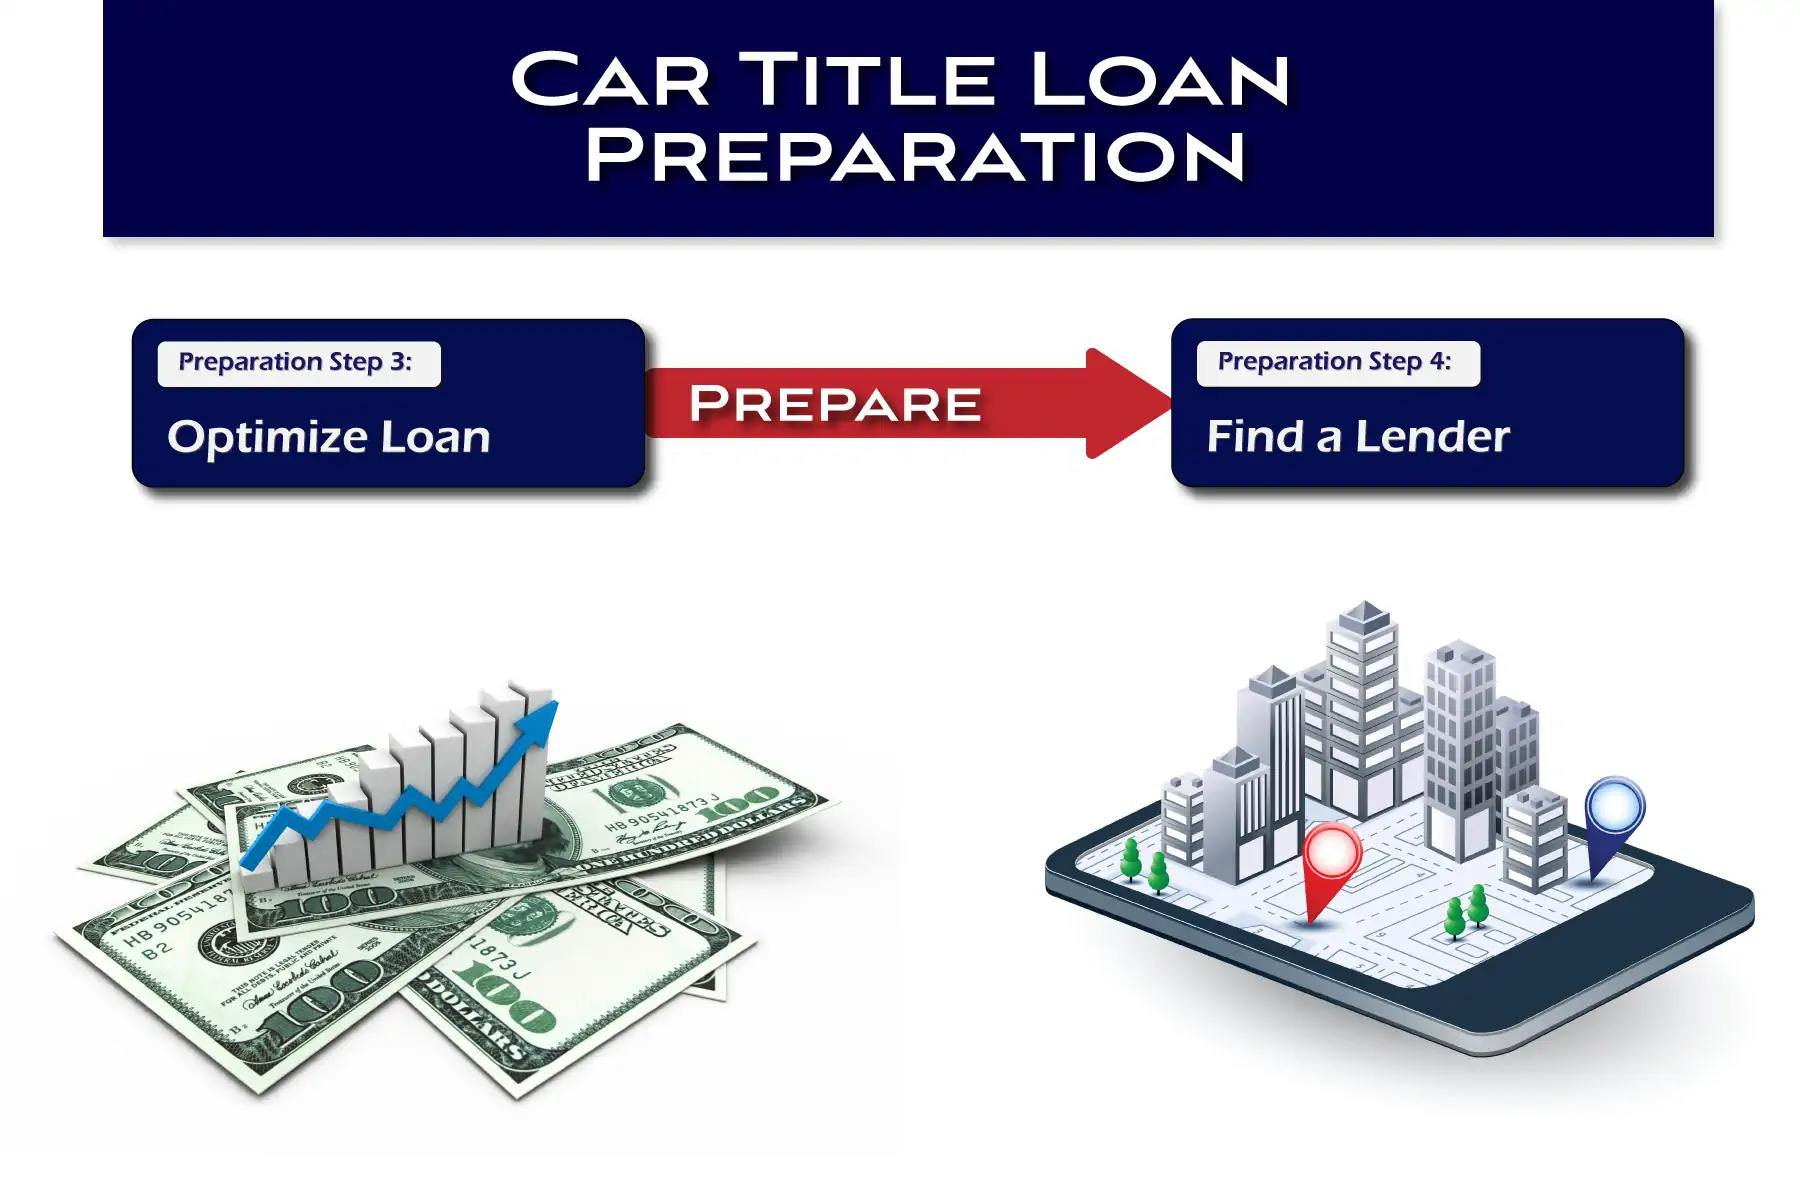 Online title loan preparation steps 3 and 4